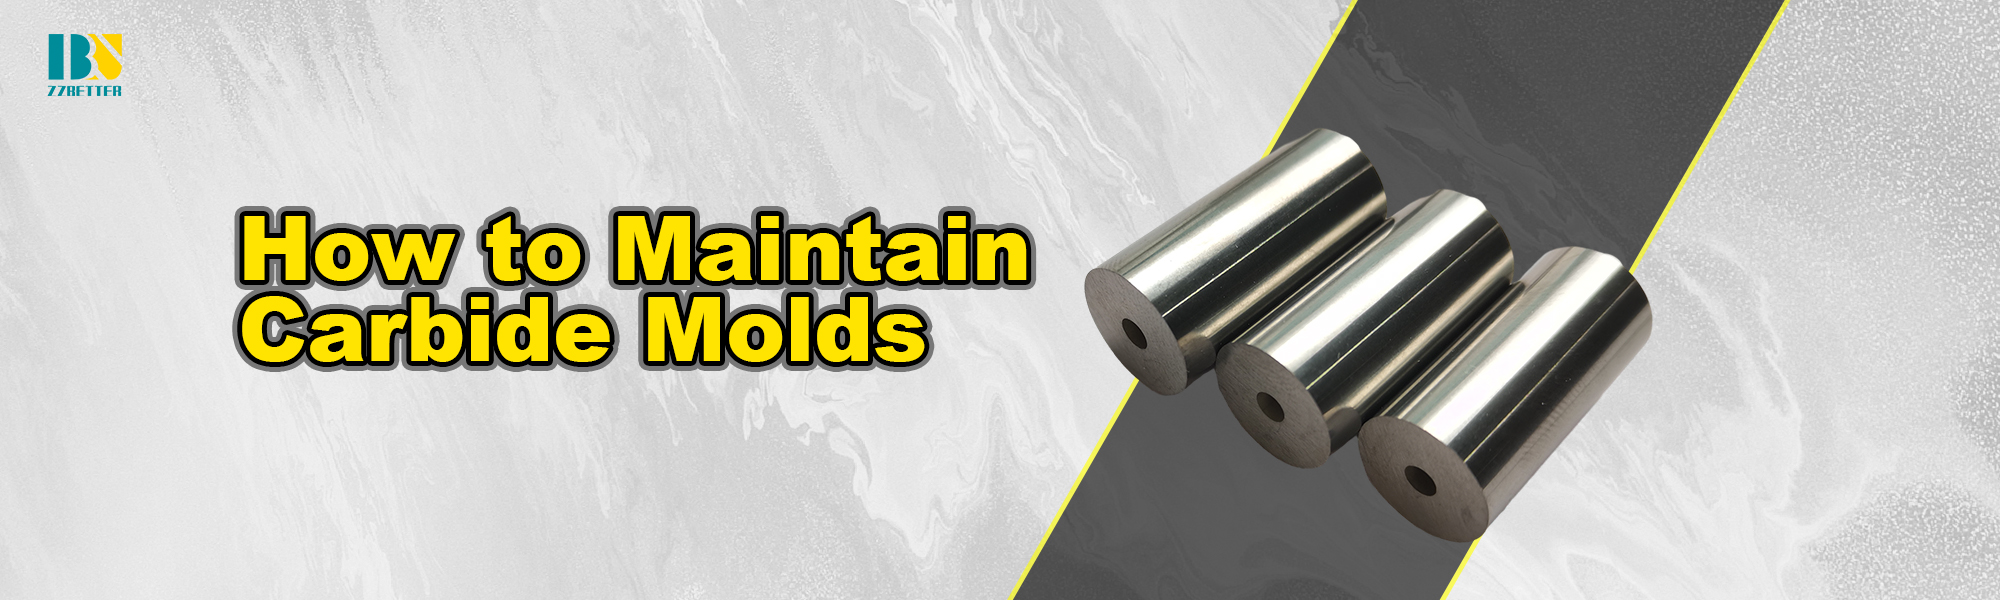 How to Maintain Carbide Molds